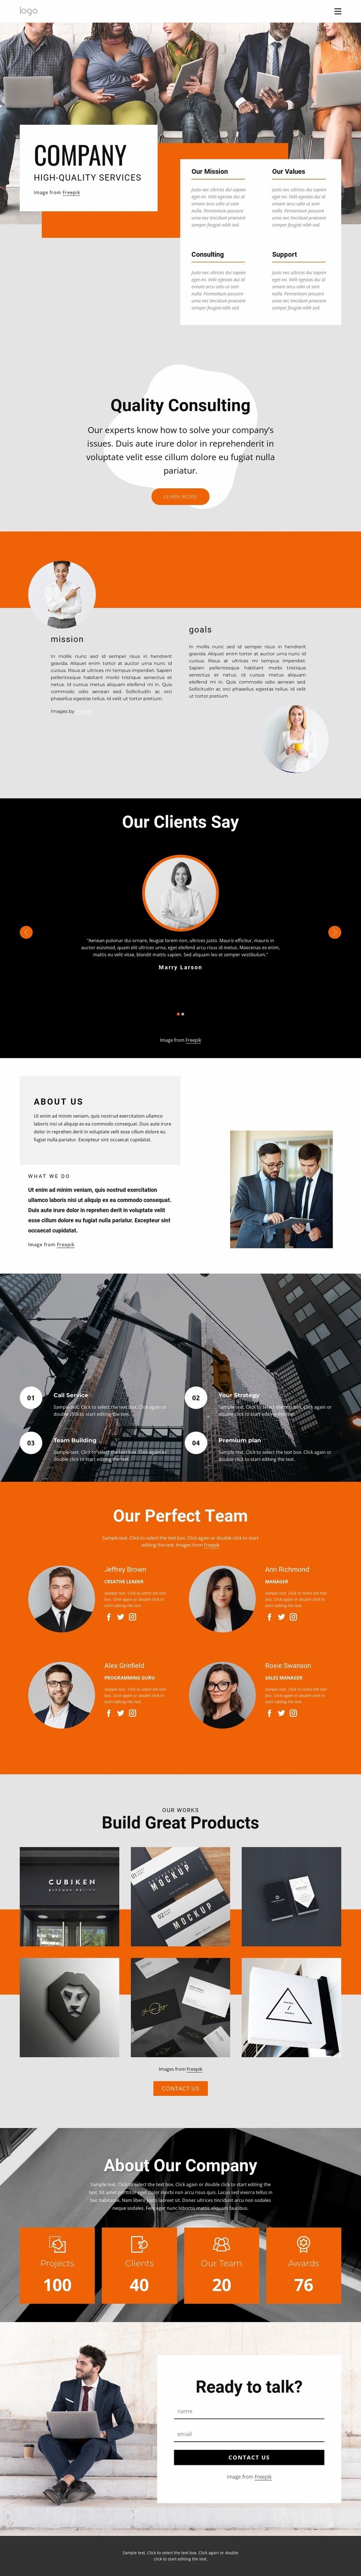 Hight quality consulting firm Web Page Designer